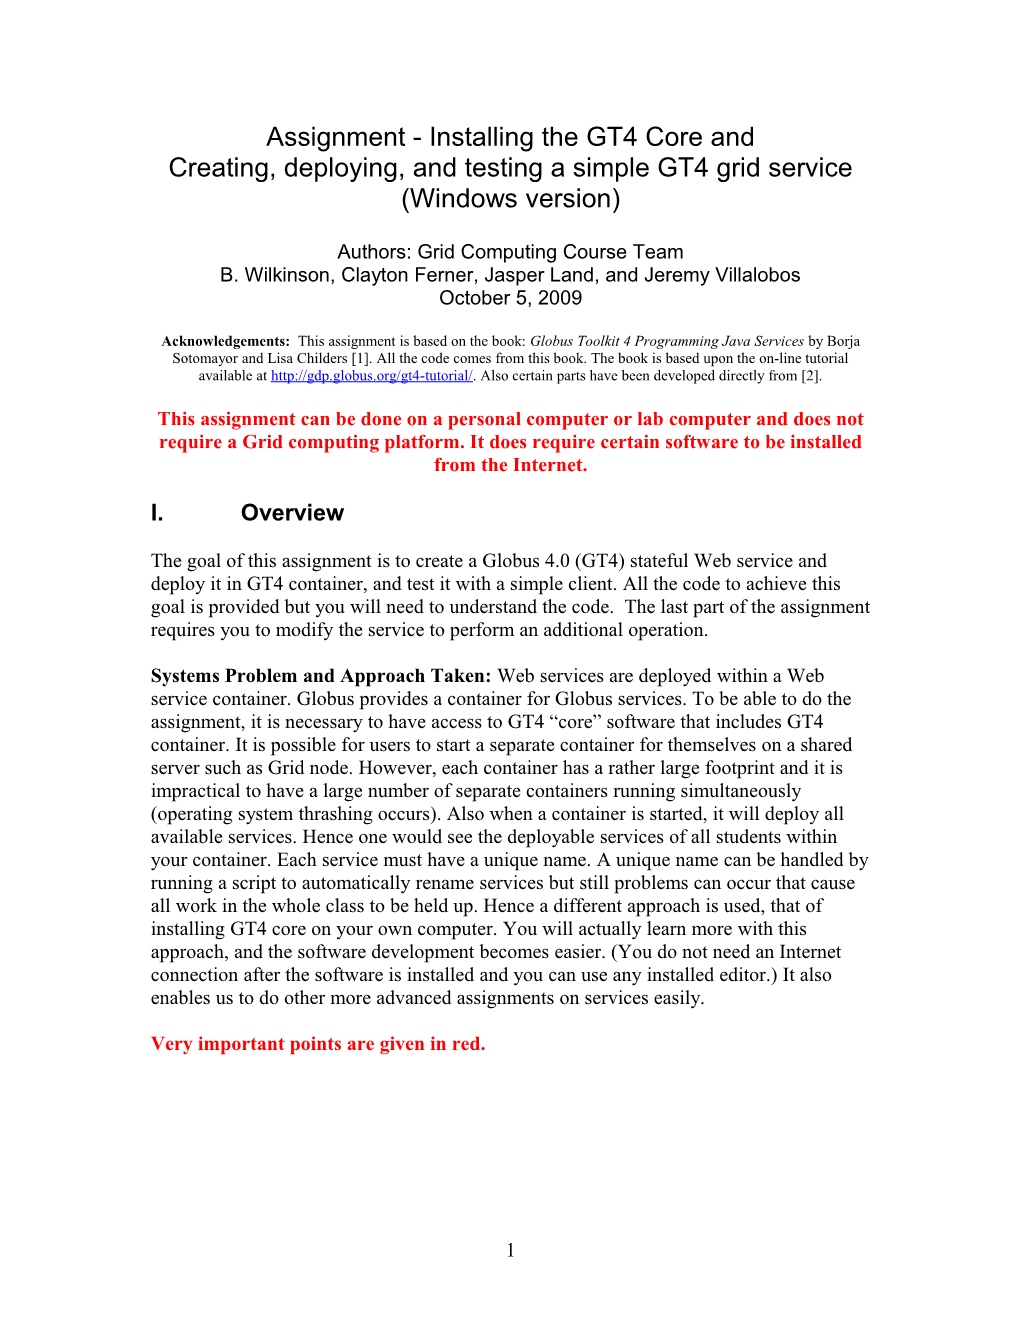 Creating, Deploying, and Testing a Simple GT4 Grid Service